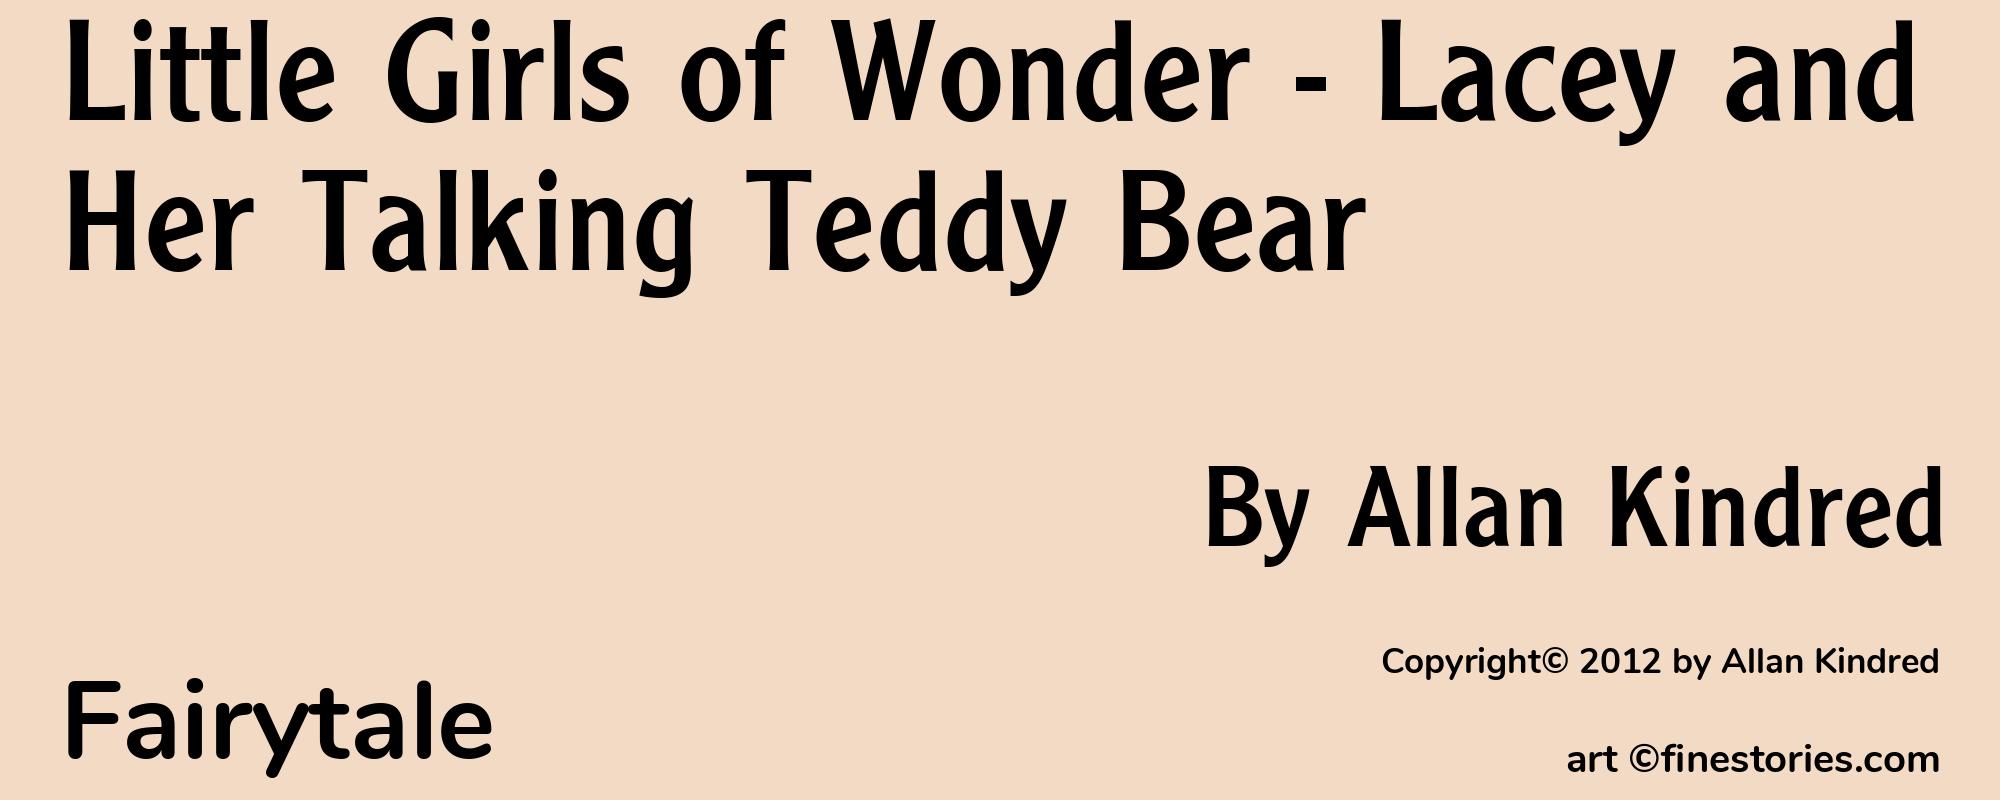 Little Girls of Wonder - Lacey and Her Talking Teddy Bear - Cover